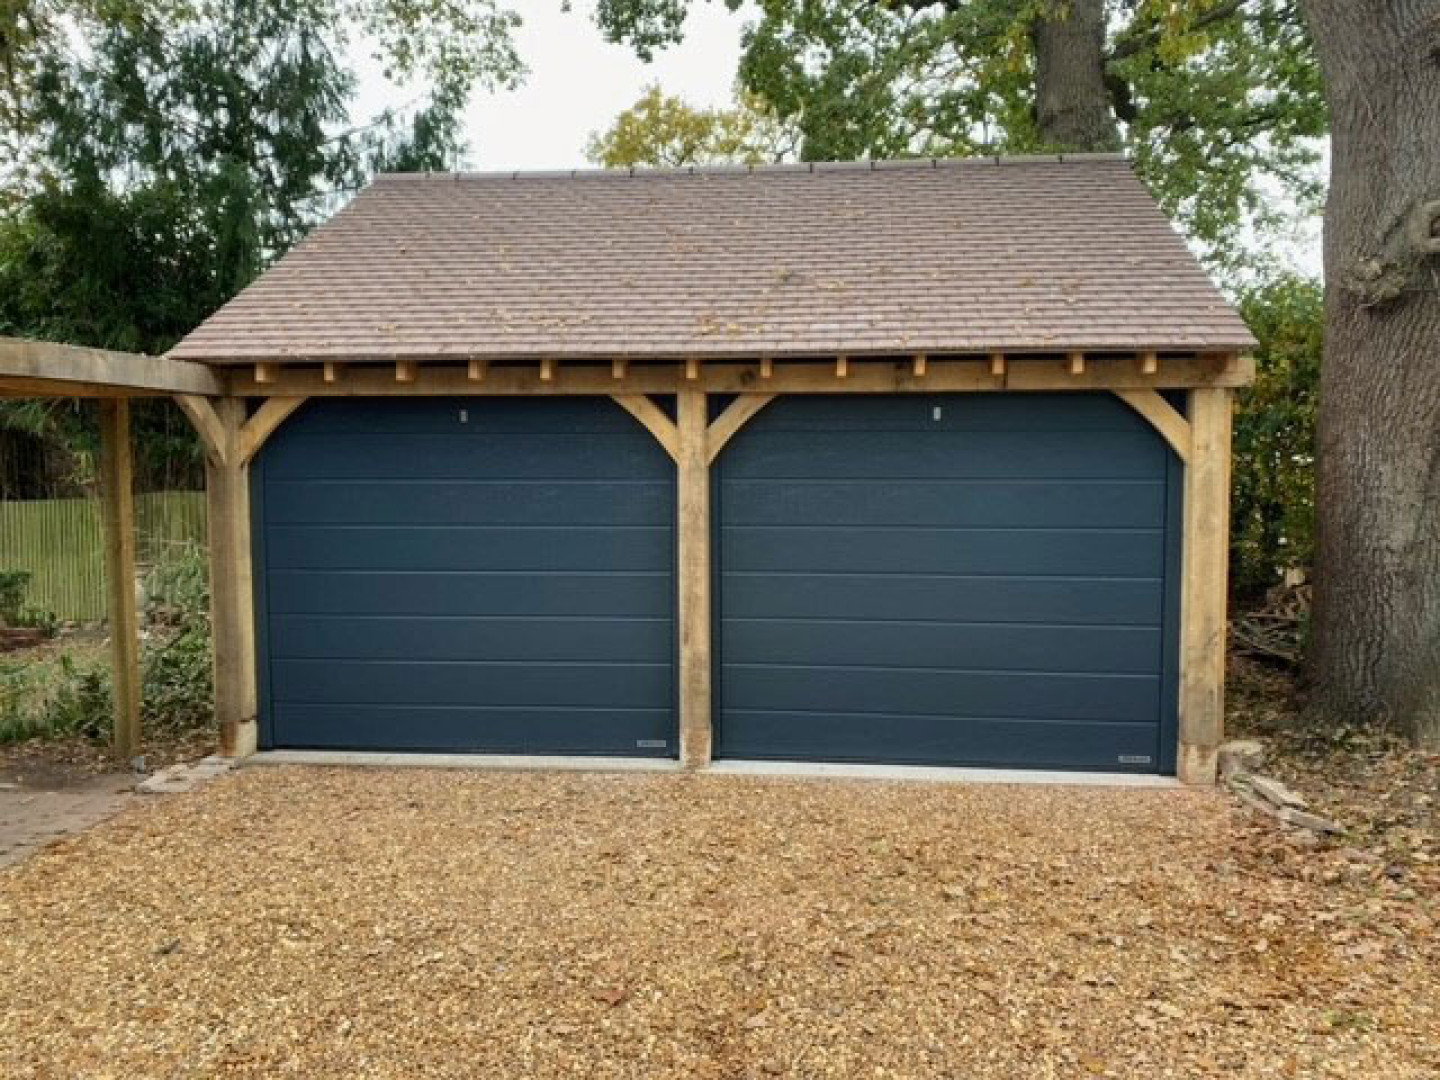 VB Garage Doors melding old and new, with two Linear Medium sectional garage doors installed in the Dorset countryside.